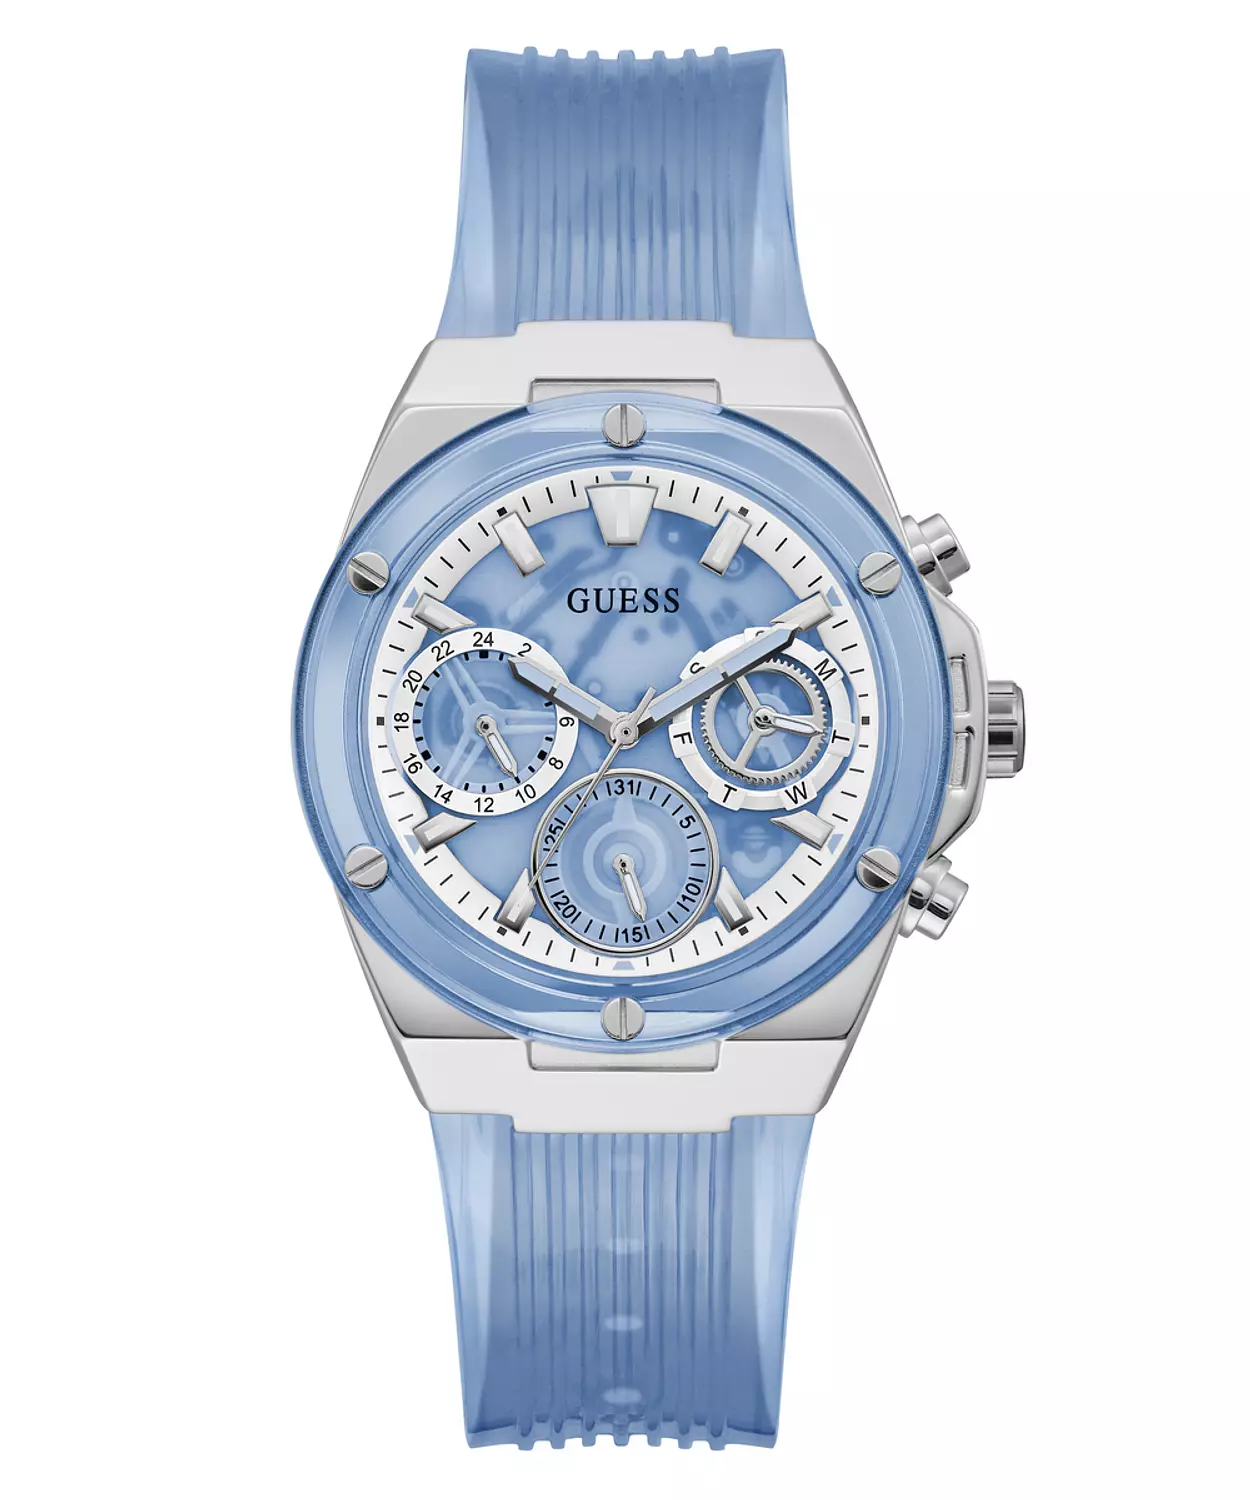 GUESS GW0409L1 ANALOG WATCH  For Women BlueBio-based PU Textured Strap  0